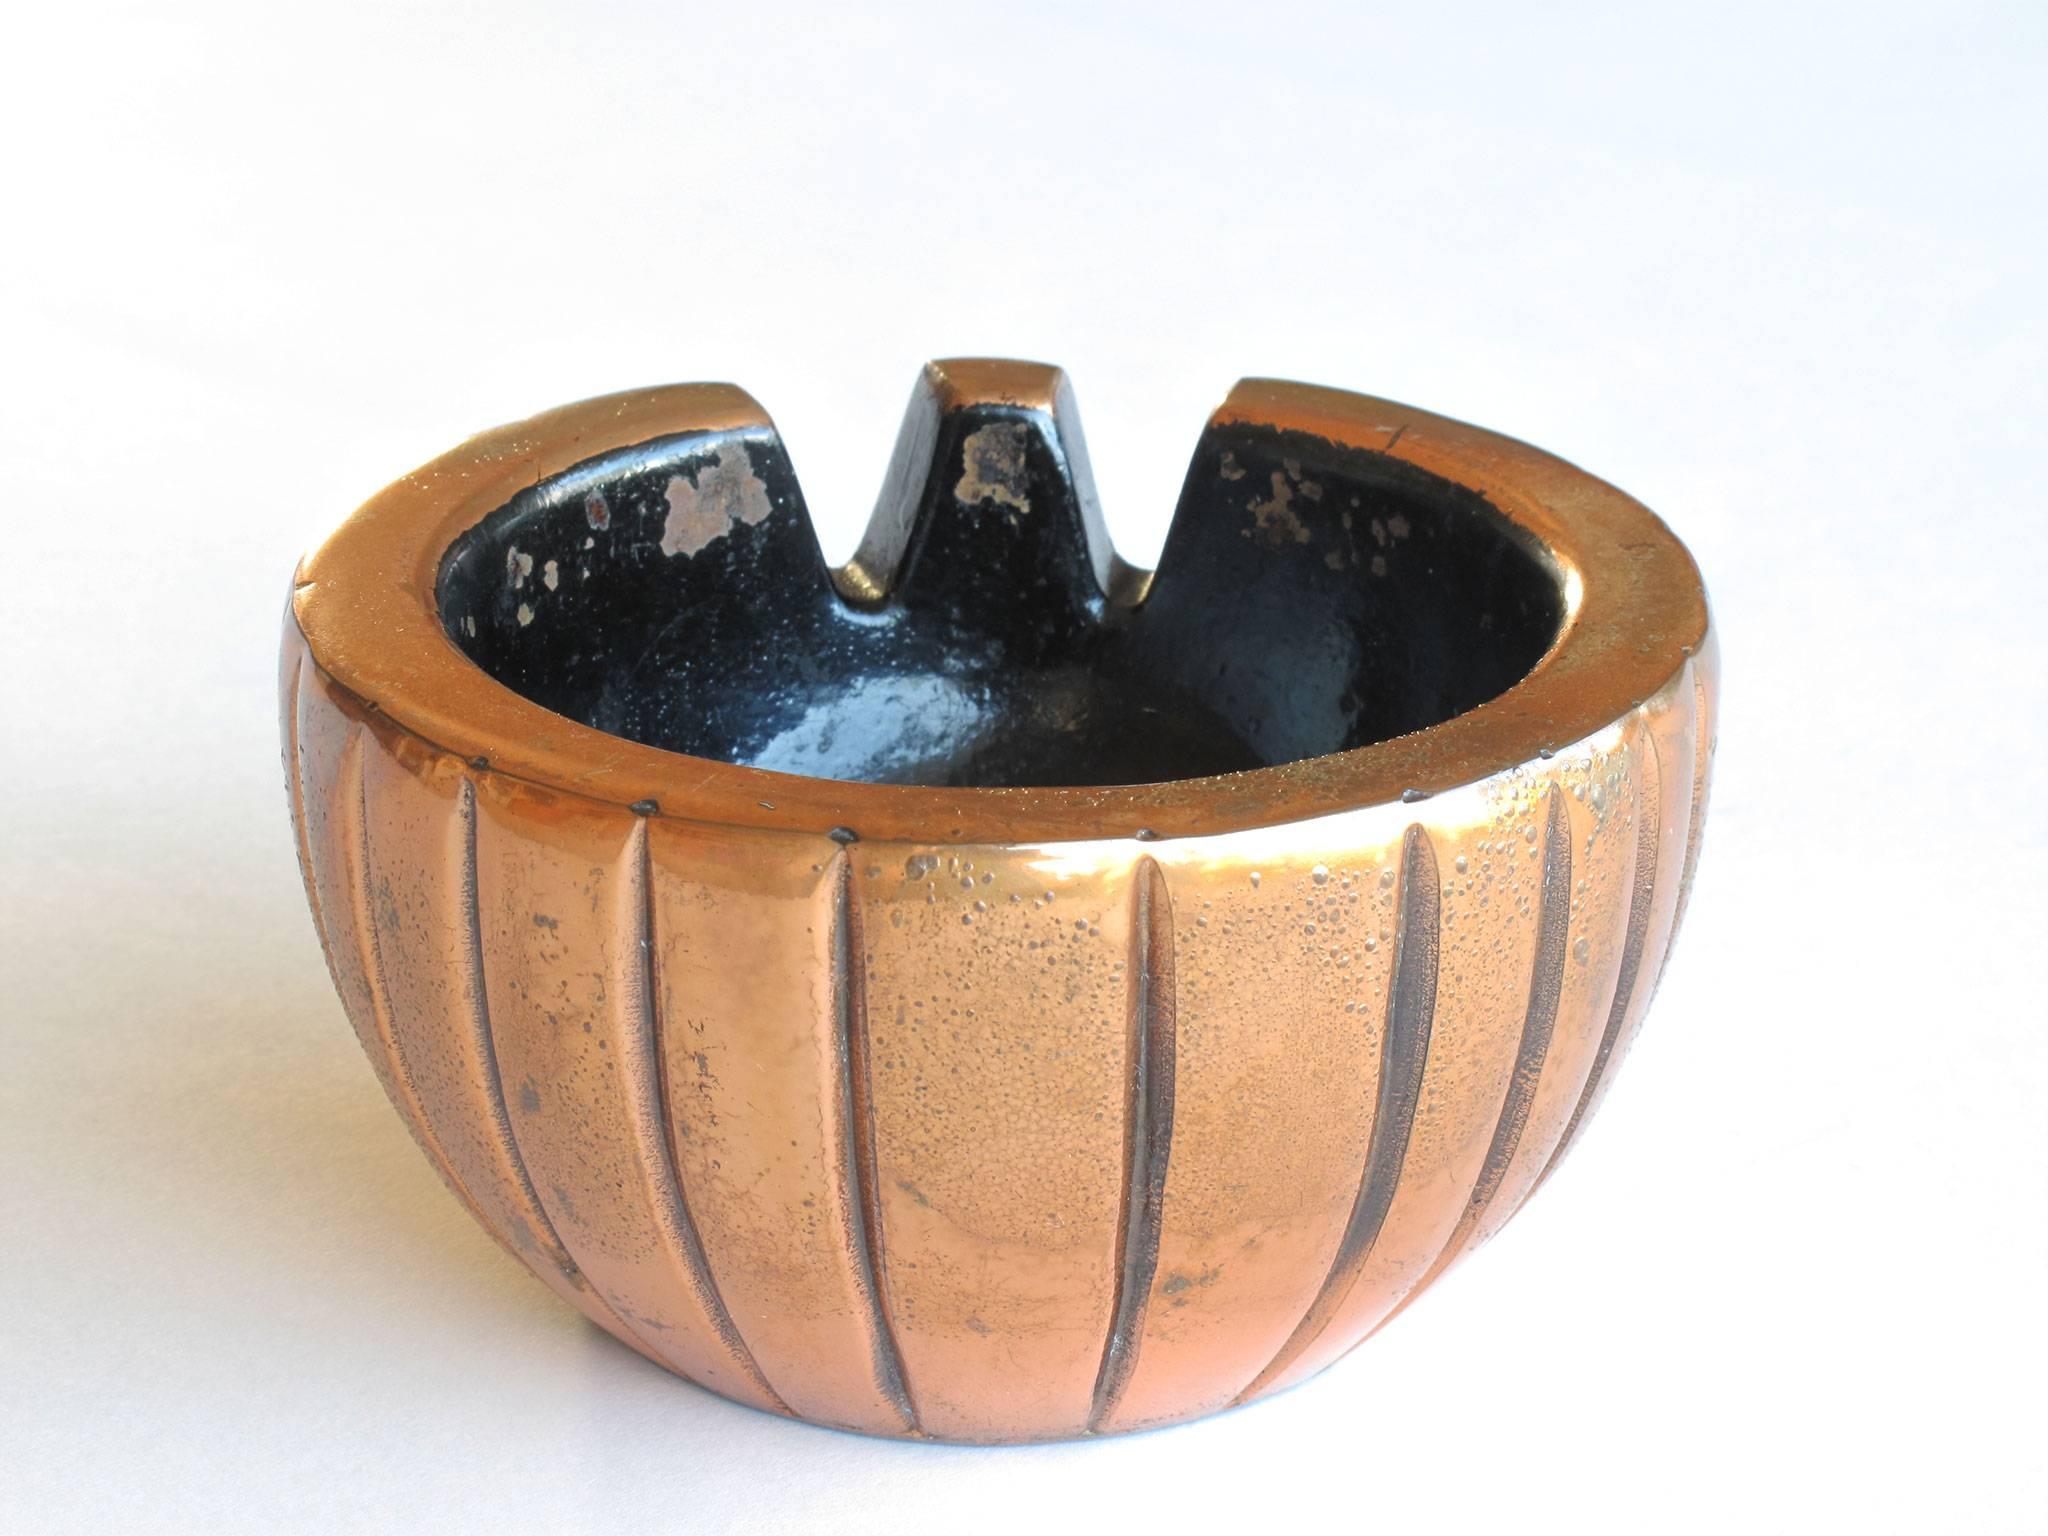 Ben Seibel Copper Plated Metal Ashtray, Jenfred Ware, 1950s For Sale 2